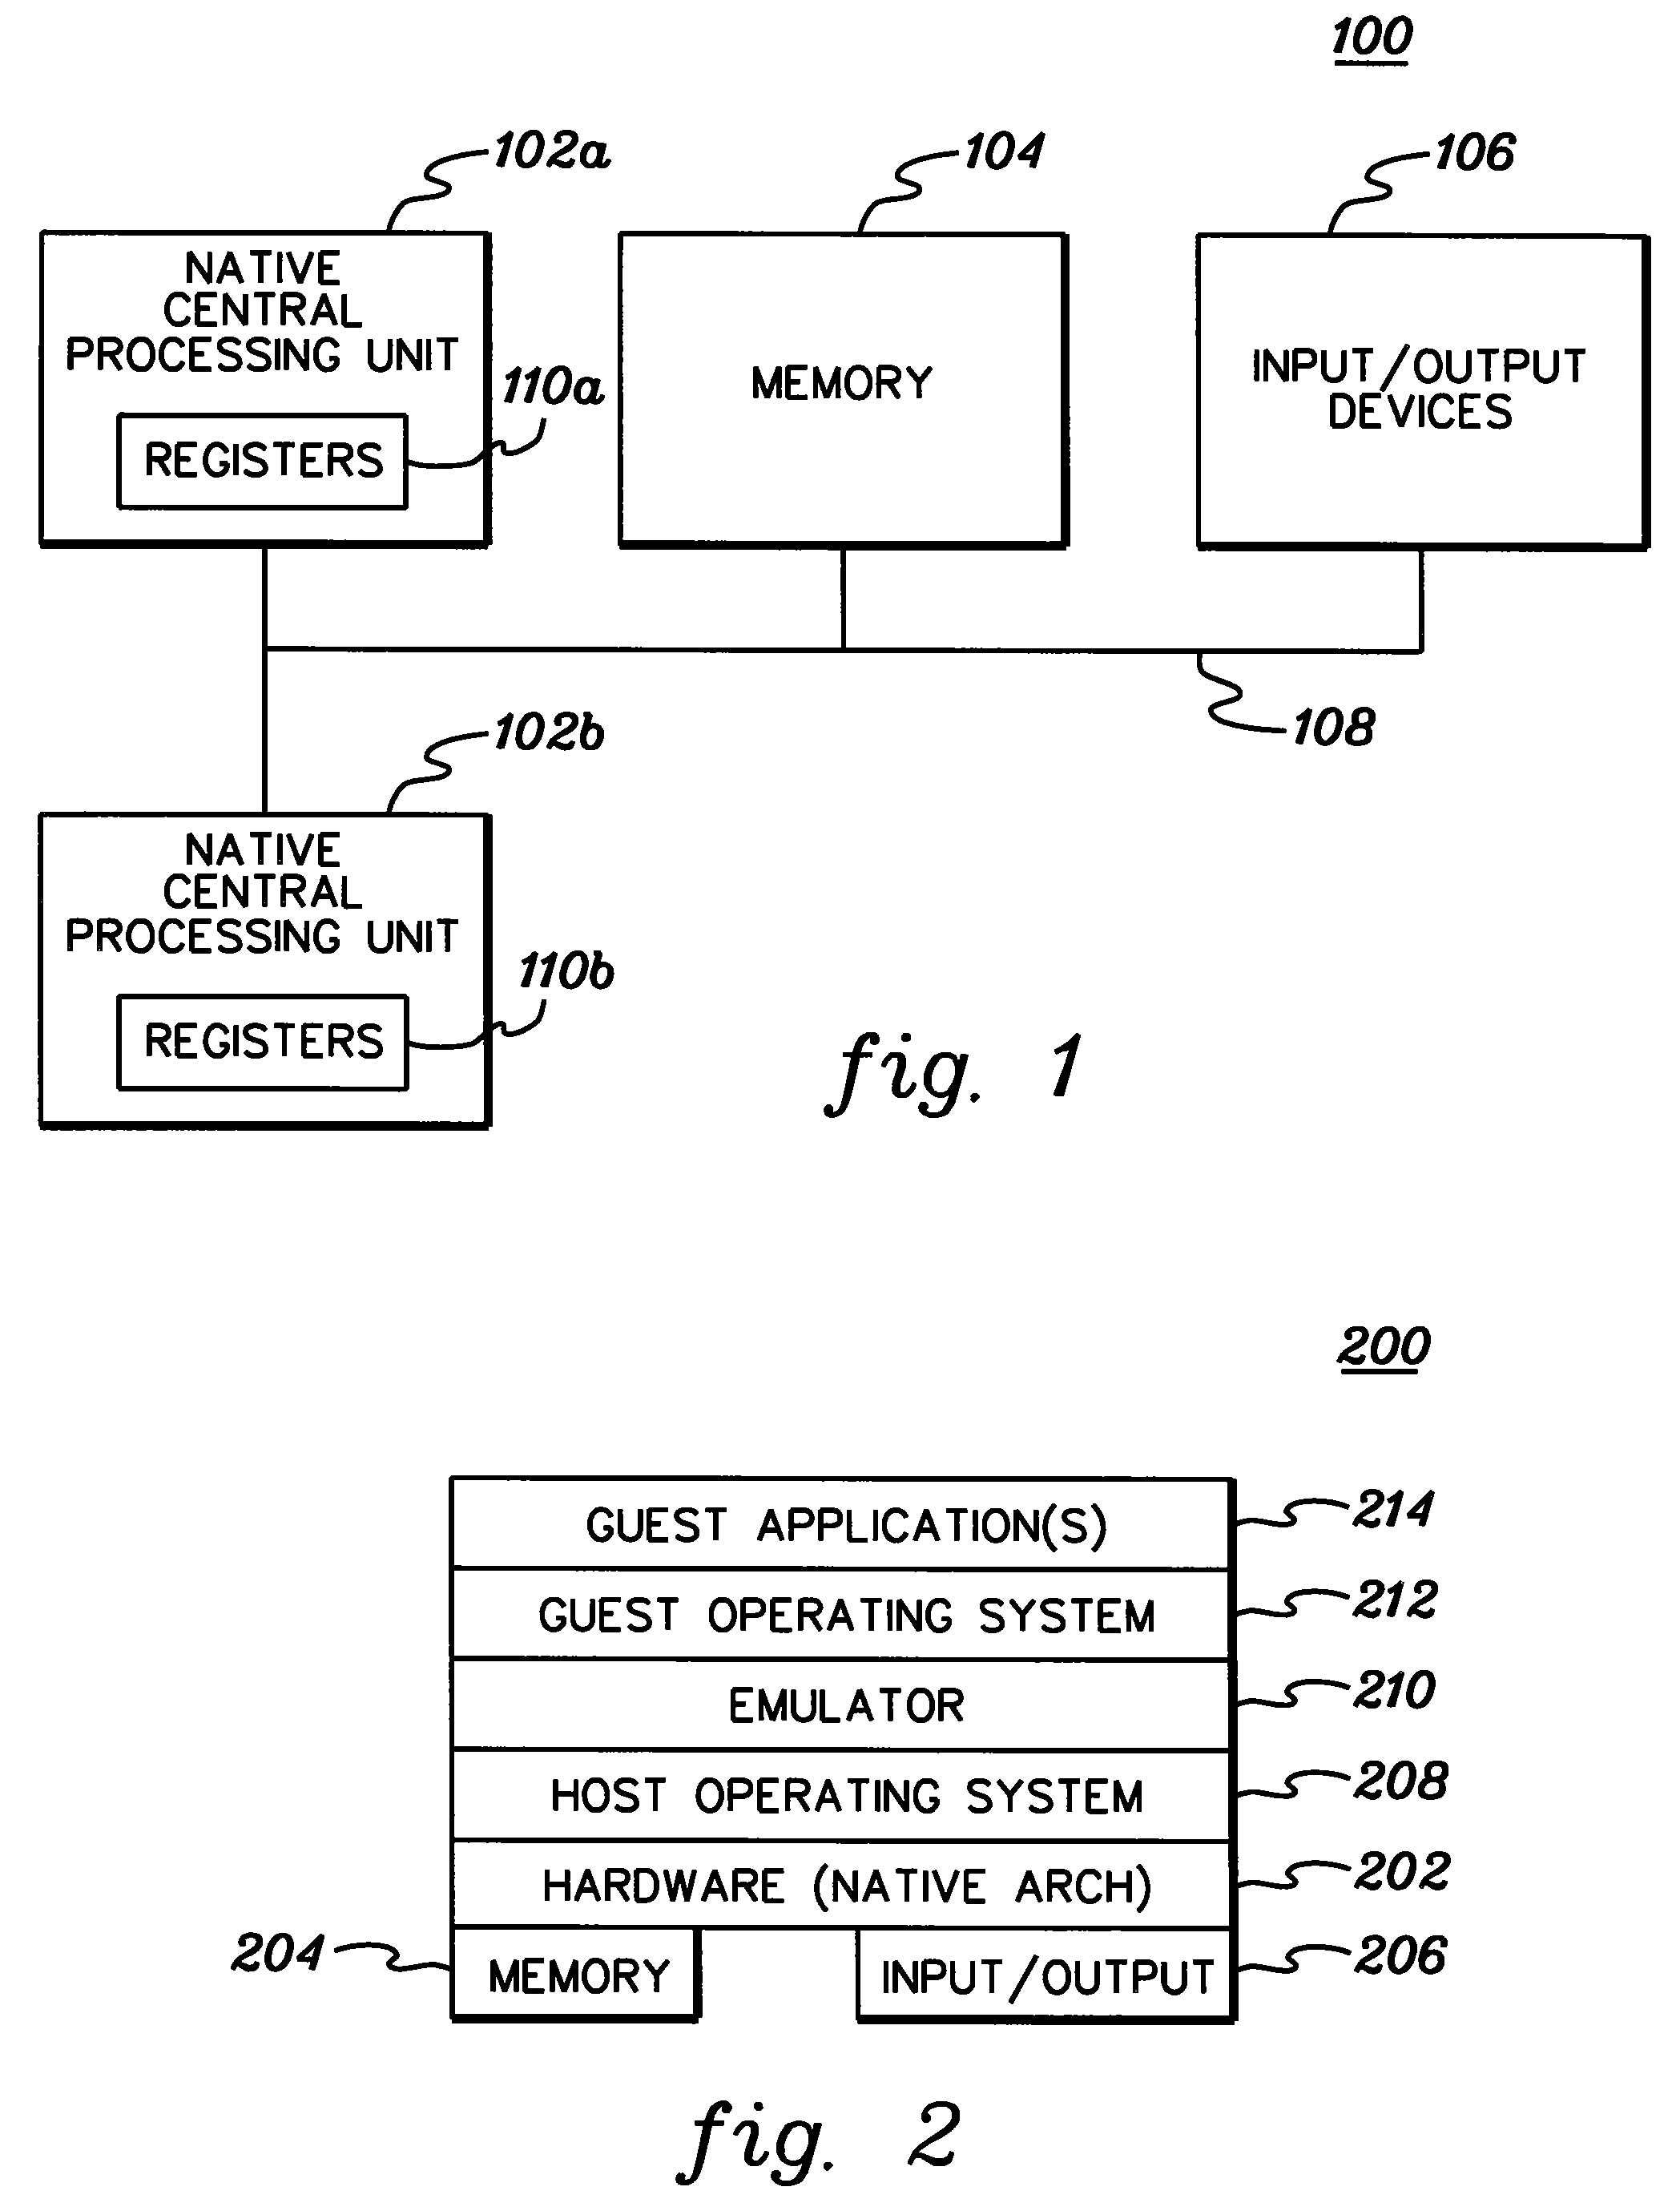 Providing memory consistency in an emulated processing environment